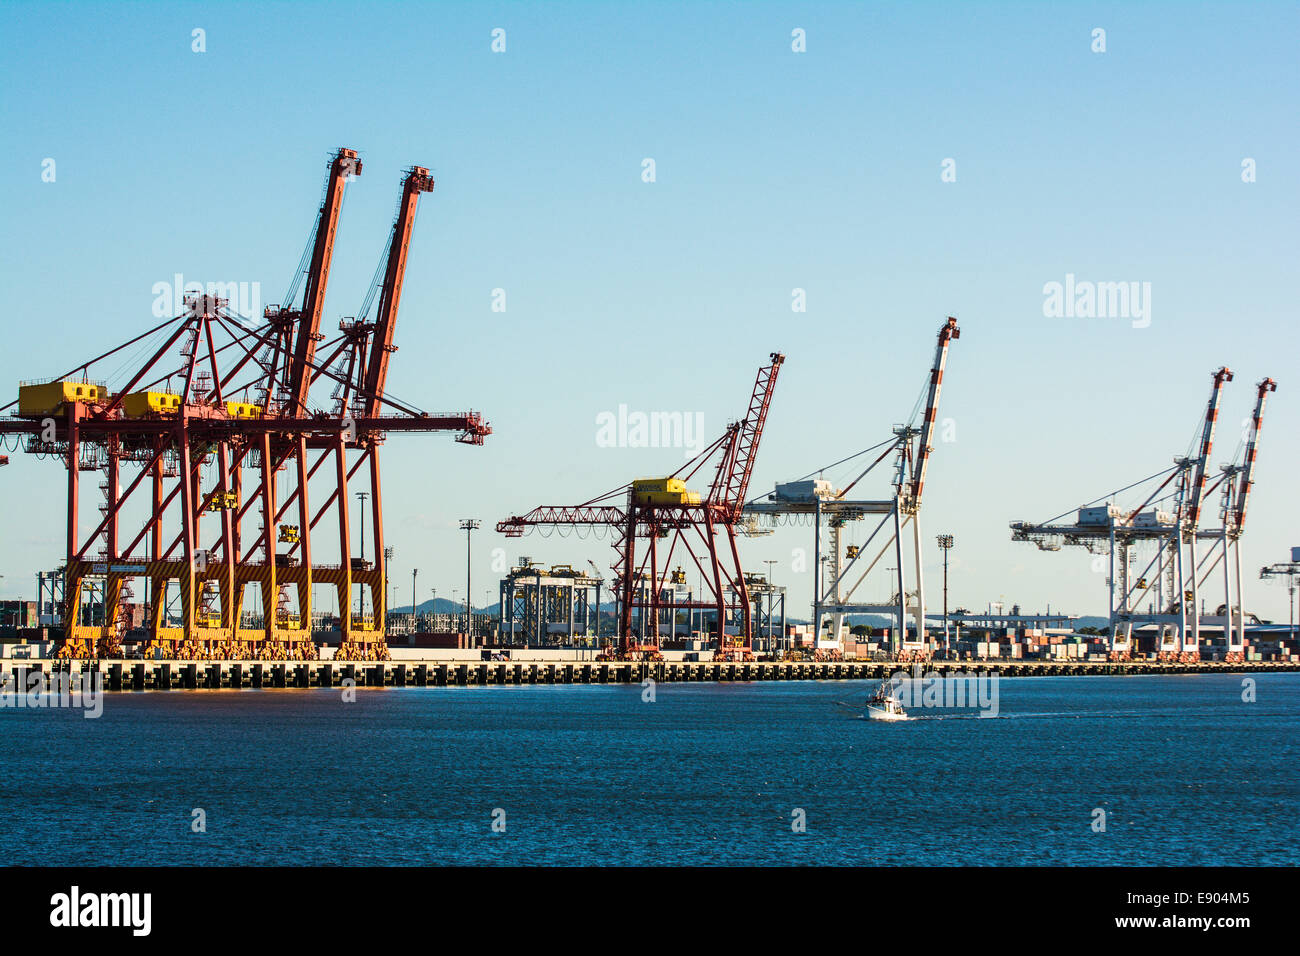 Boat sailing in front of container ship jetties, The Port of Brisbane, Brisbane, Queensland, Australia Stock Photo